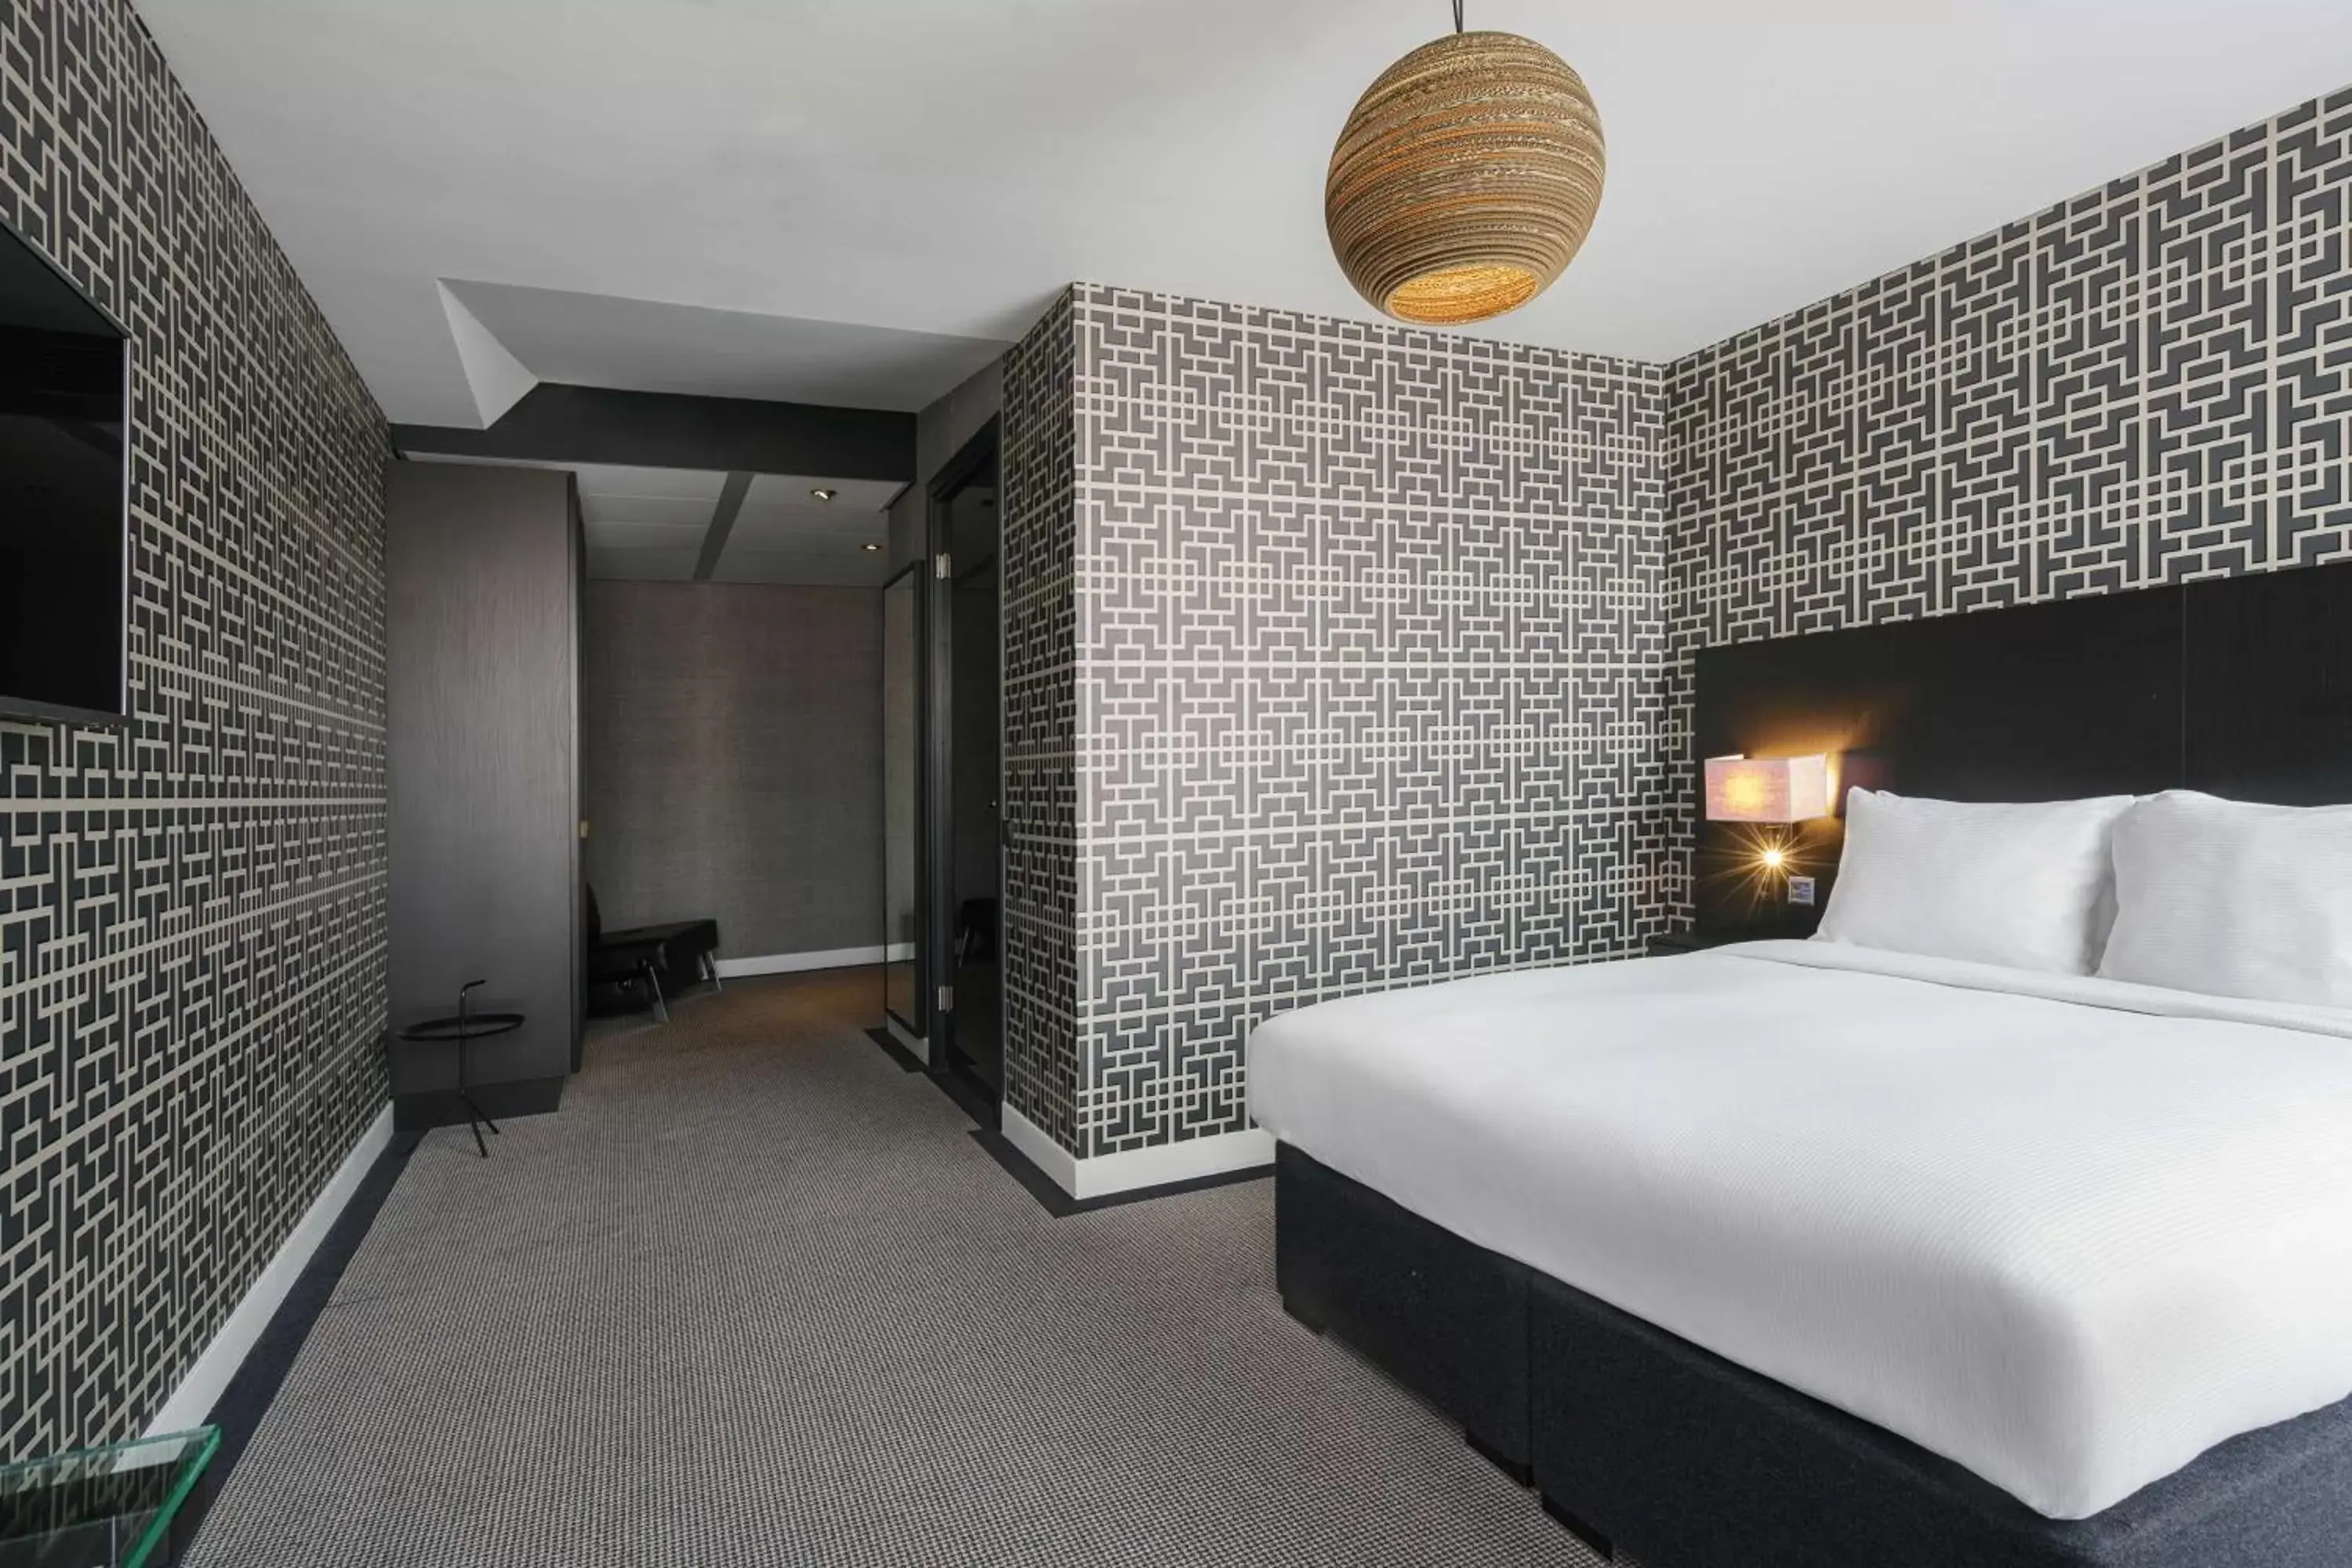 Bed in DoubleTree By Hilton Hotel Amsterdam - Ndsm Wharf